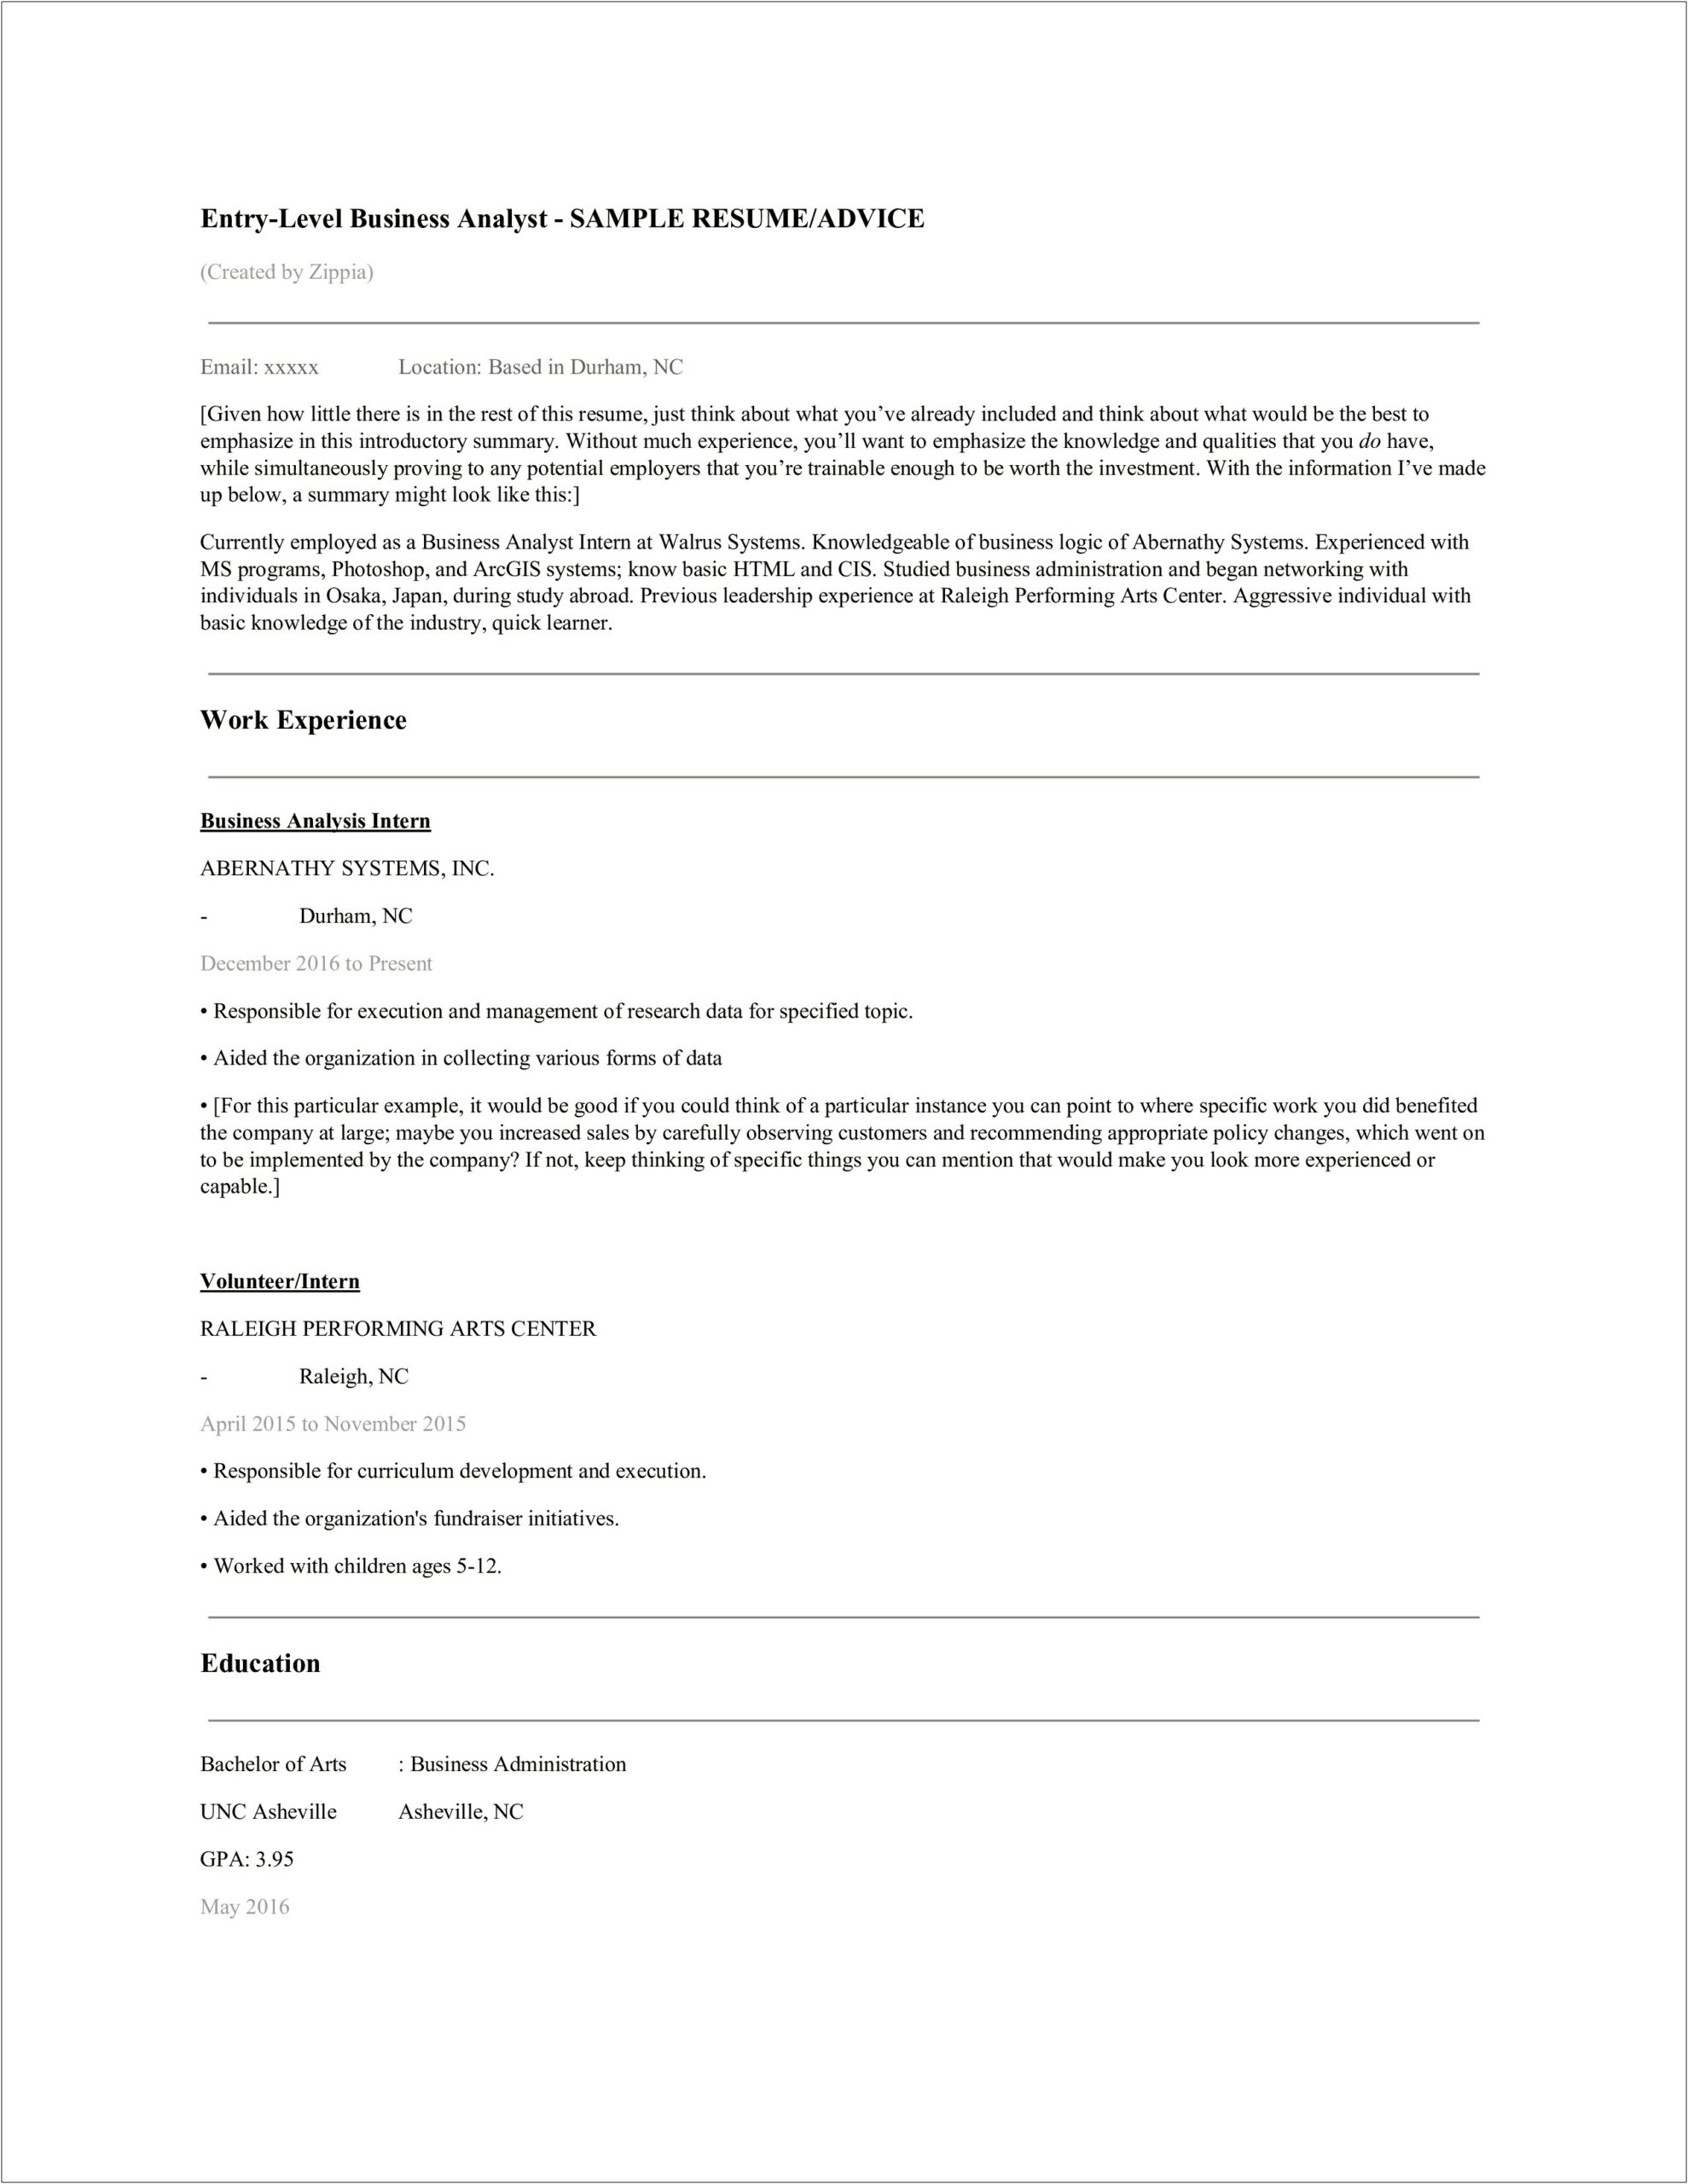 Business Analyst Resume Examples Entry Level